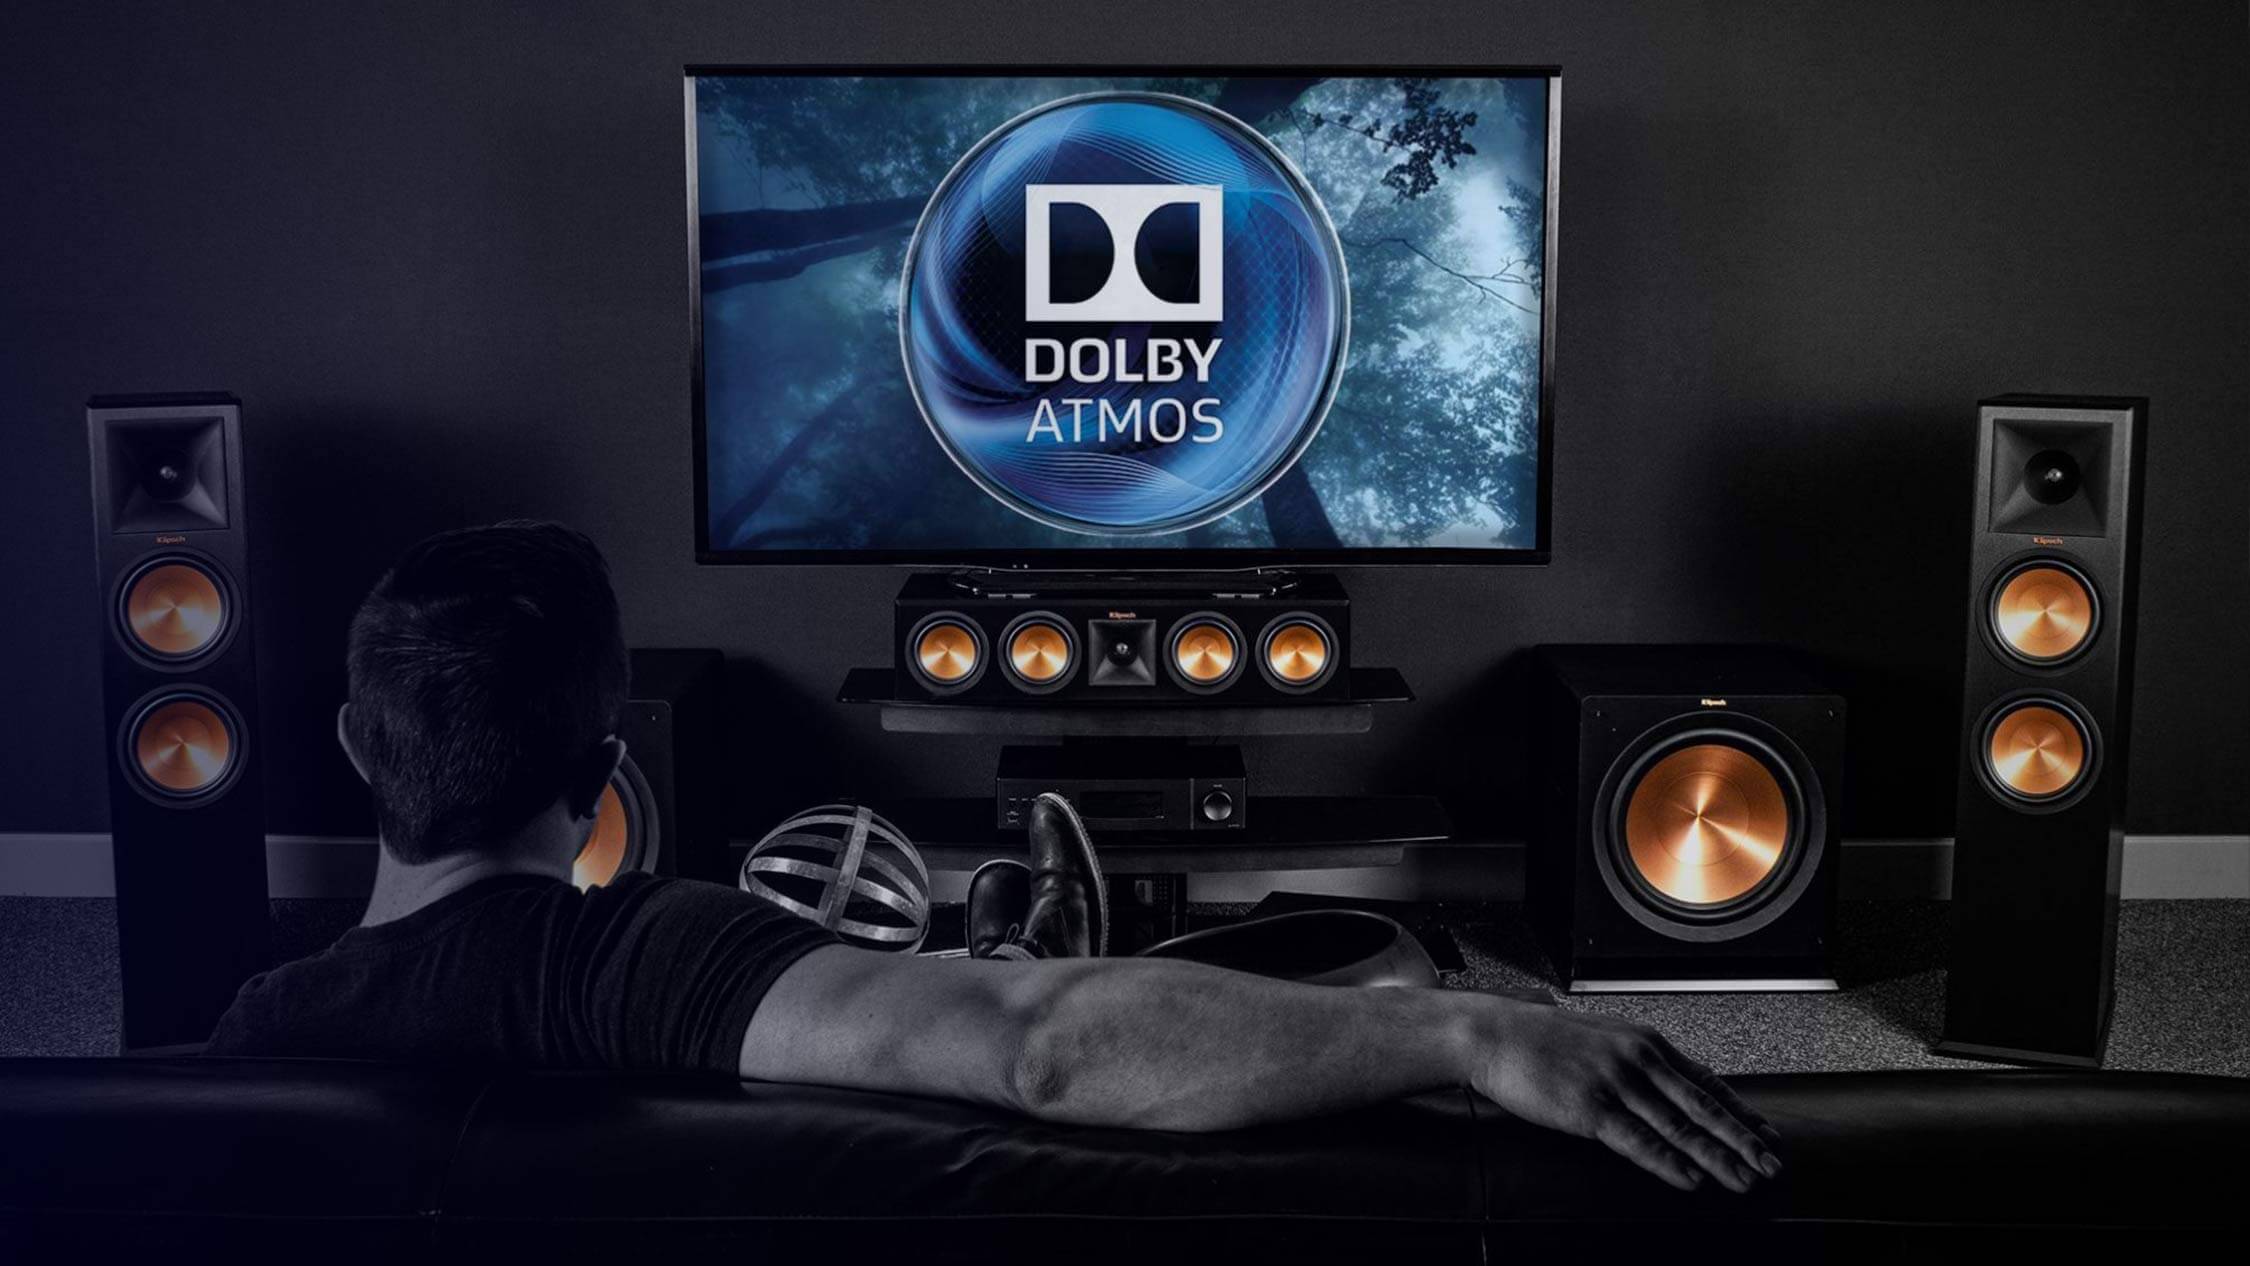 Are You Really Getting Dolby Atmos Sound?